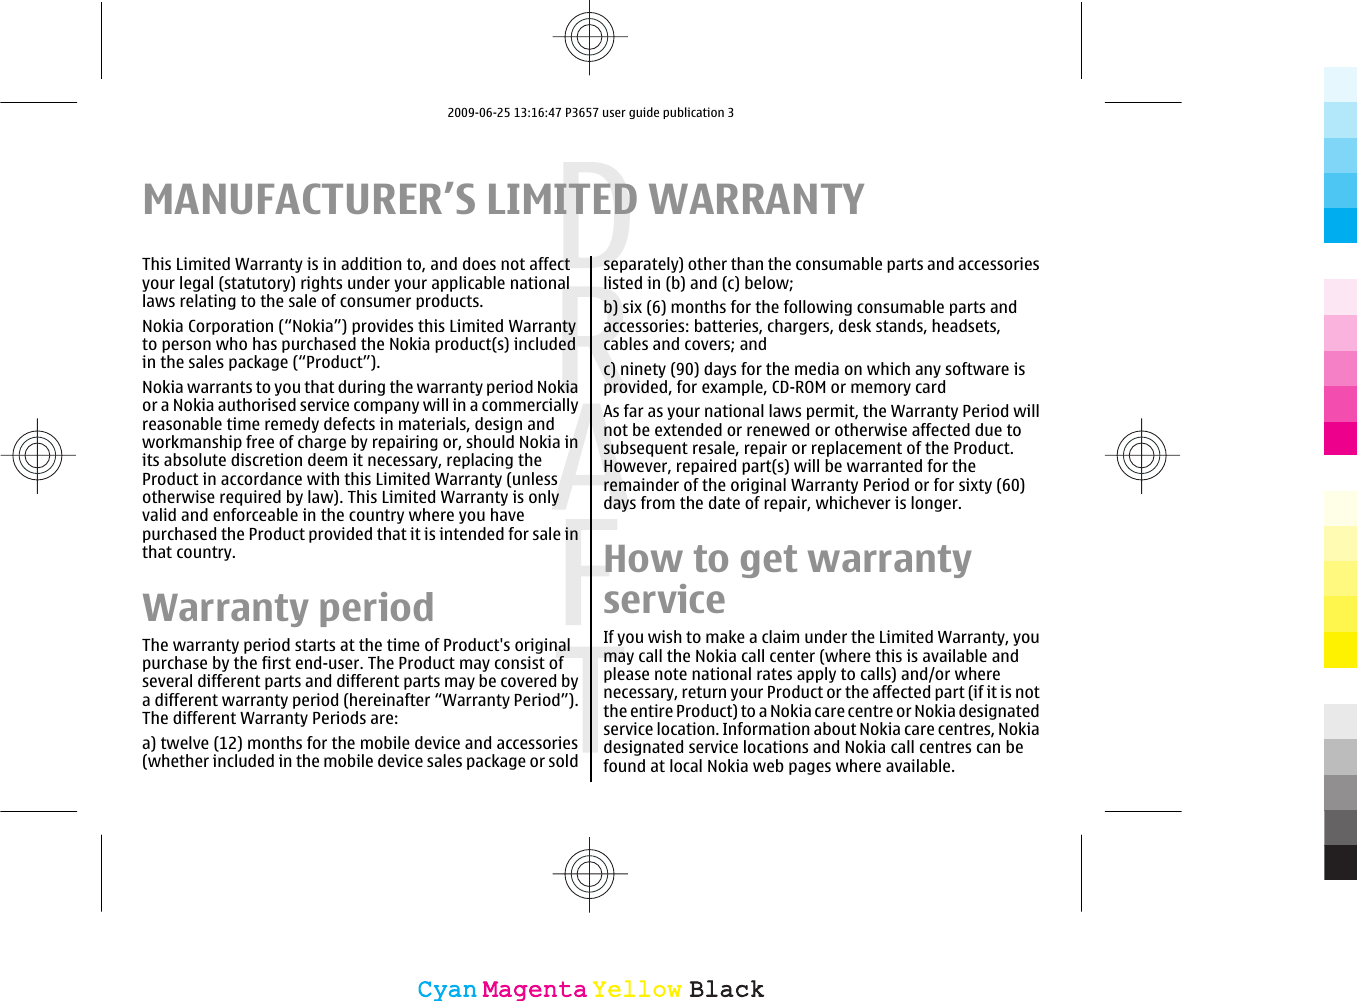 MANUFACTURER’S LIMITED WARRANTYThis Limited Warranty is in addition to, and does not affectyour legal (statutory) rights under your applicable nationallaws relating to the sale of consumer products.Nokia Corporation (“Nokia”) provides this Limited Warrantyto person who has purchased the Nokia product(s) includedin the sales package (“Product”).Nokia warrants to you that during the warranty period Nokiaor a Nokia authorised service company will in a commerciallyreasonable time remedy defects in materials, design andworkmanship free of charge by repairing or, should Nokia inits absolute discretion deem it necessary, replacing theProduct in accordance with this Limited Warranty (unlessotherwise required by law). This Limited Warranty is onlyvalid and enforceable in the country where you havepurchased the Product provided that it is intended for sale inthat country.Warranty periodThe warranty period starts at the time of Product&apos;s originalpurchase by the first end-user. The Product may consist ofseveral different parts and different parts may be covered bya different warranty period (hereinafter “Warranty Period”).The different Warranty Periods are:a) twelve (12) months for the mobile device and accessories(whether included in the mobile device sales package or soldseparately) other than the consumable parts and accessorieslisted in (b) and (c) below;b) six (6) months for the following consumable parts andaccessories: batteries, chargers, desk stands, headsets,cables and covers; andc) ninety (90) days for the media on which any software isprovided, for example, CD-ROM or memory cardAs far as your national laws permit, the Warranty Period willnot be extended or renewed or otherwise affected due tosubsequent resale, repair or replacement of the Product.However, repaired part(s) will be warranted for theremainder of the original Warranty Period or for sixty (60)days from the date of repair, whichever is longer.How to get warrantyserviceIf you wish to make a claim under the Limited Warranty, youmay call the Nokia call center (where this is available andplease note national rates apply to calls) and/or wherenecessary, return your Product or the affected part (if it is notthe entire Product) to a Nokia care centre or Nokia designatedservice location. Information about Nokia care centres, Nokiadesignated service locations and Nokia call centres can befound at local Nokia web pages where available.CyanCyanMagentaMagentaYellowYellowBlackBlack2009-06-25 13:16:47 P3657 user guide publication 3